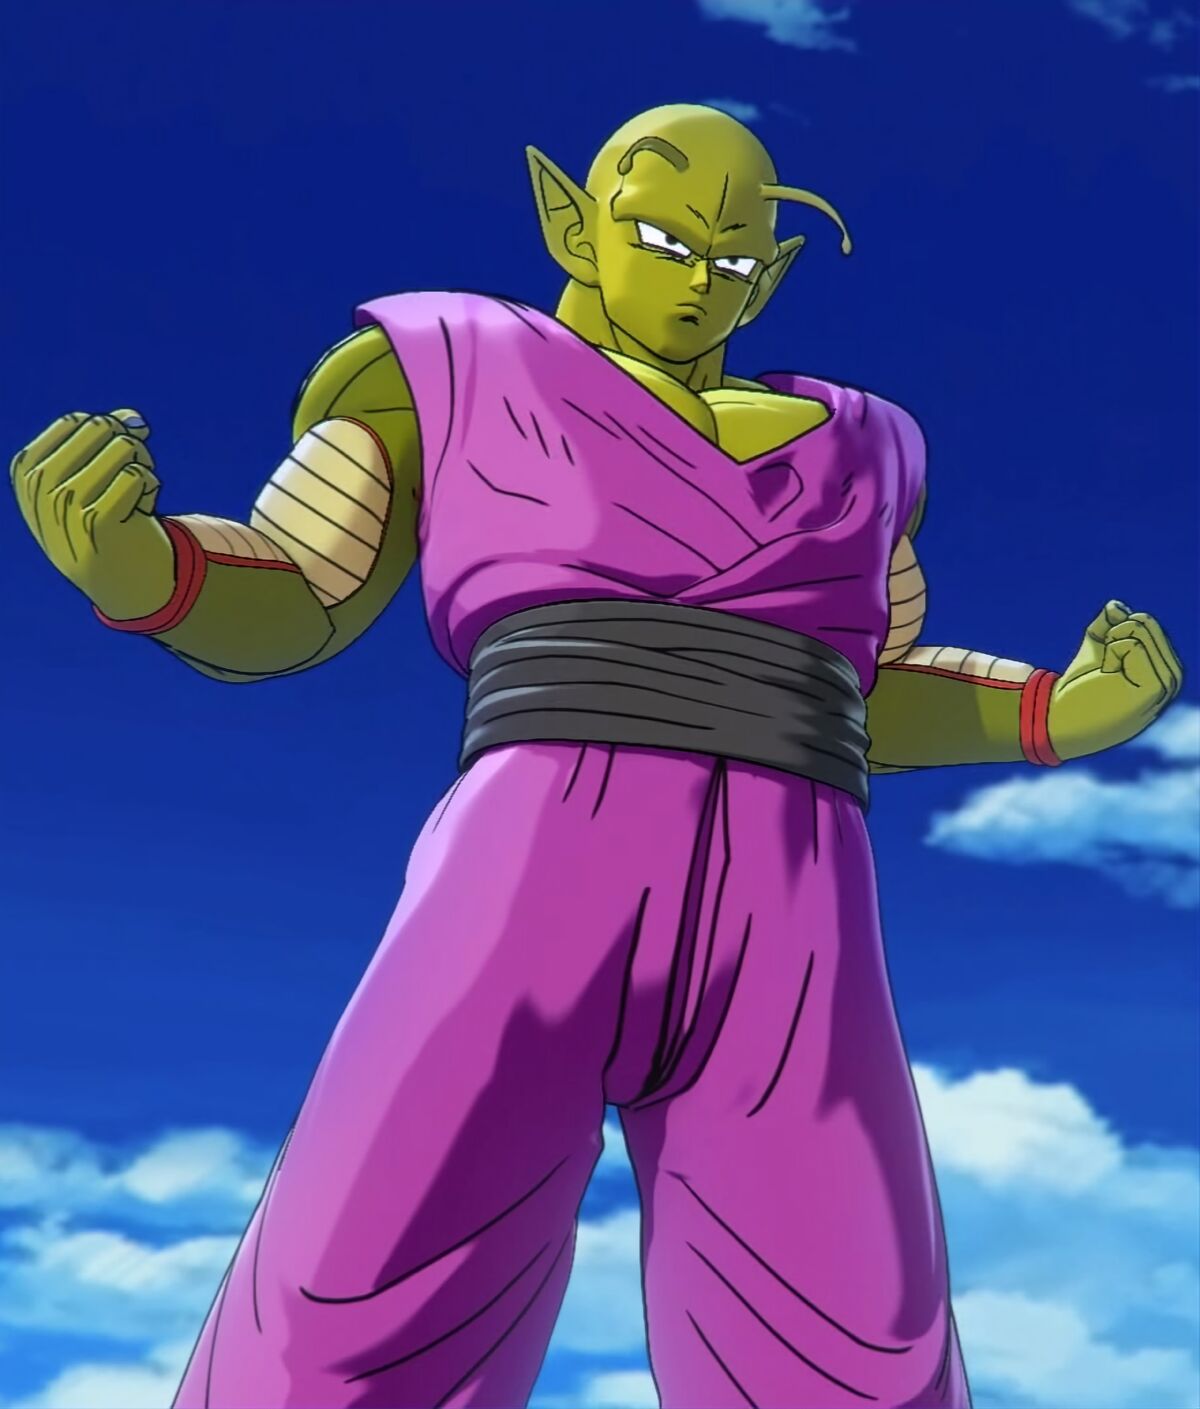 Piccolo (Power Awakening) Makes His Debut in Dragon Ball Xenoverse 2's Hero  of Justice DLC Pack 2!]